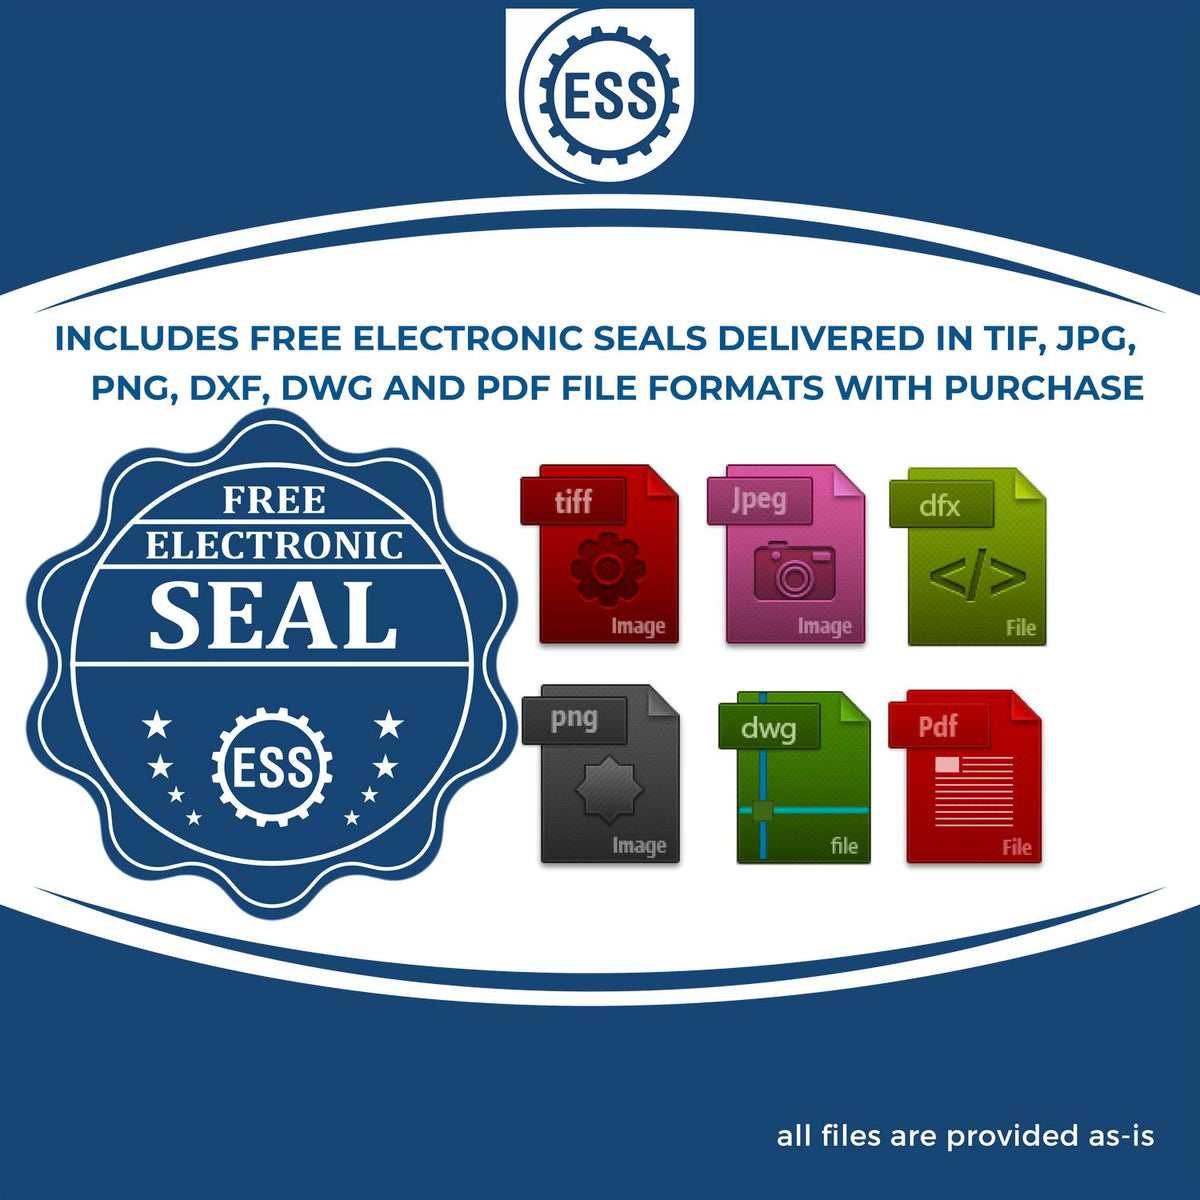 An infographic for the free electronic seal for the State of Mississippi Extended Long Reach Geologist Seal illustrating the different file type icons such as DXF, DWG, TIF, JPG and PNG.